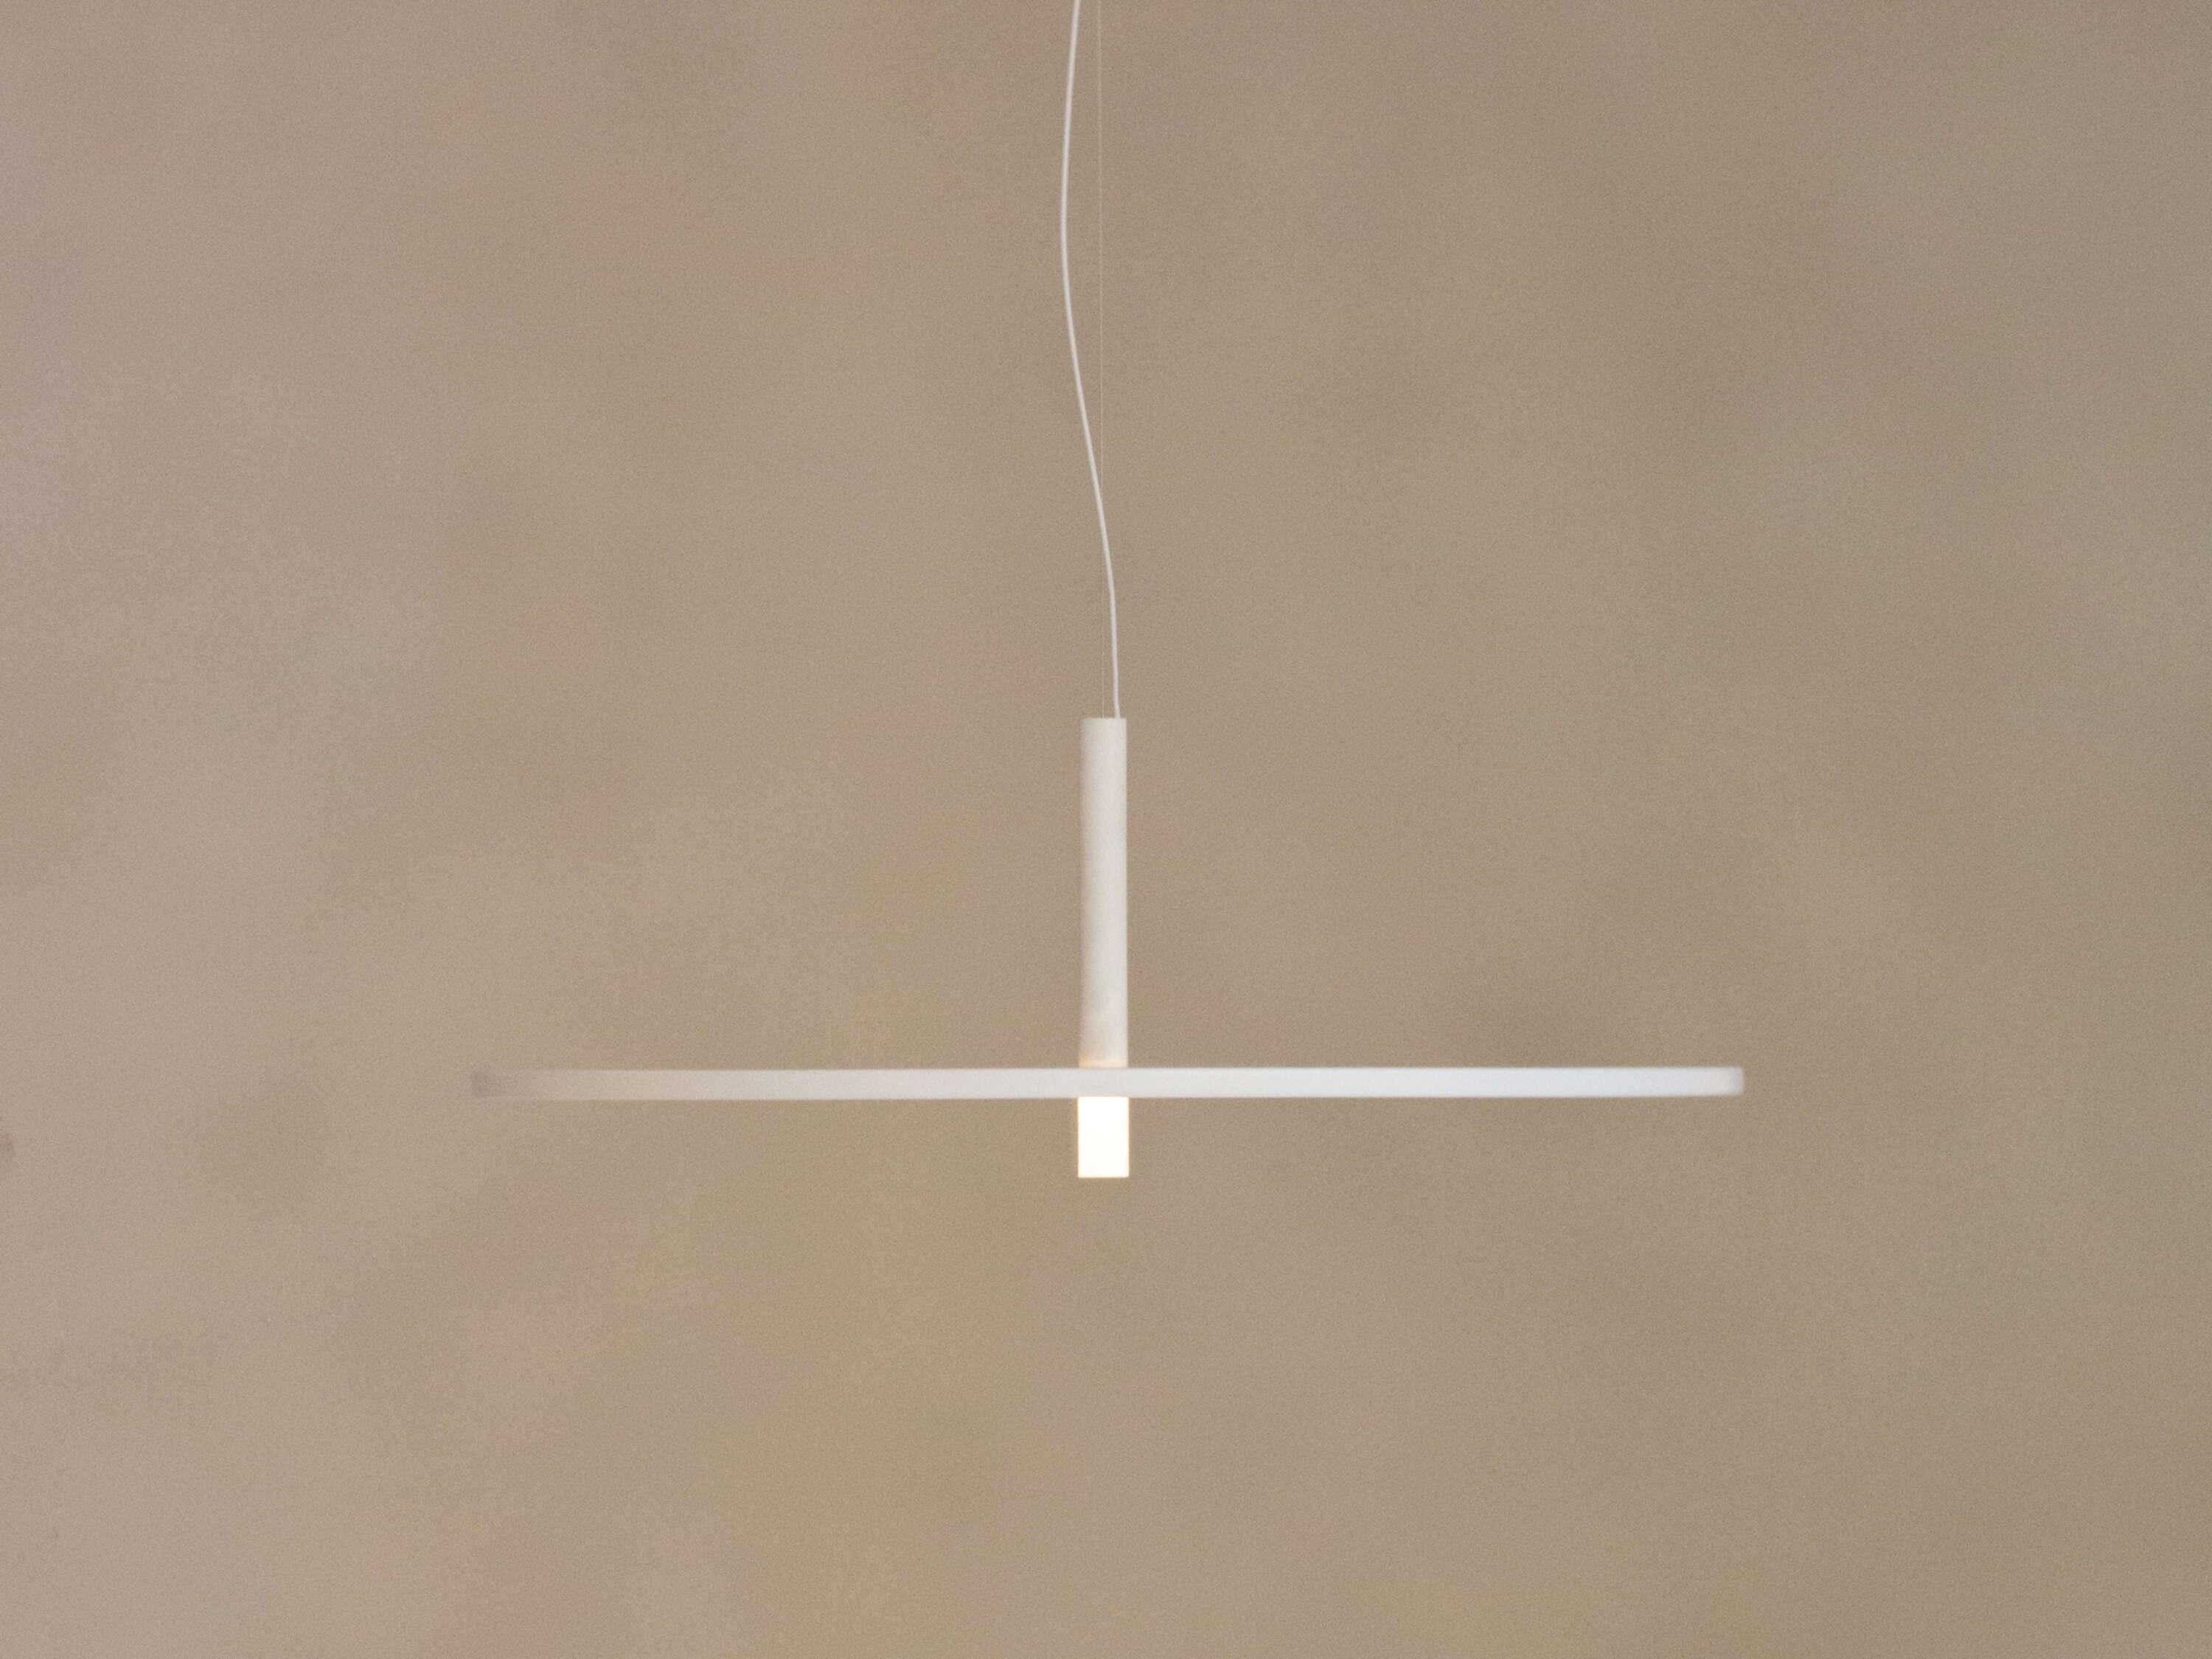 Flos My Disc Suspended Lamp of Aluminum and Polycarbonate in Matt White Color by Michael Anastassiades

My Circuit Disc is a a suspended lamp with diffused light composed of a slender horizontal disc crossed by a vertical stem with a refined balance